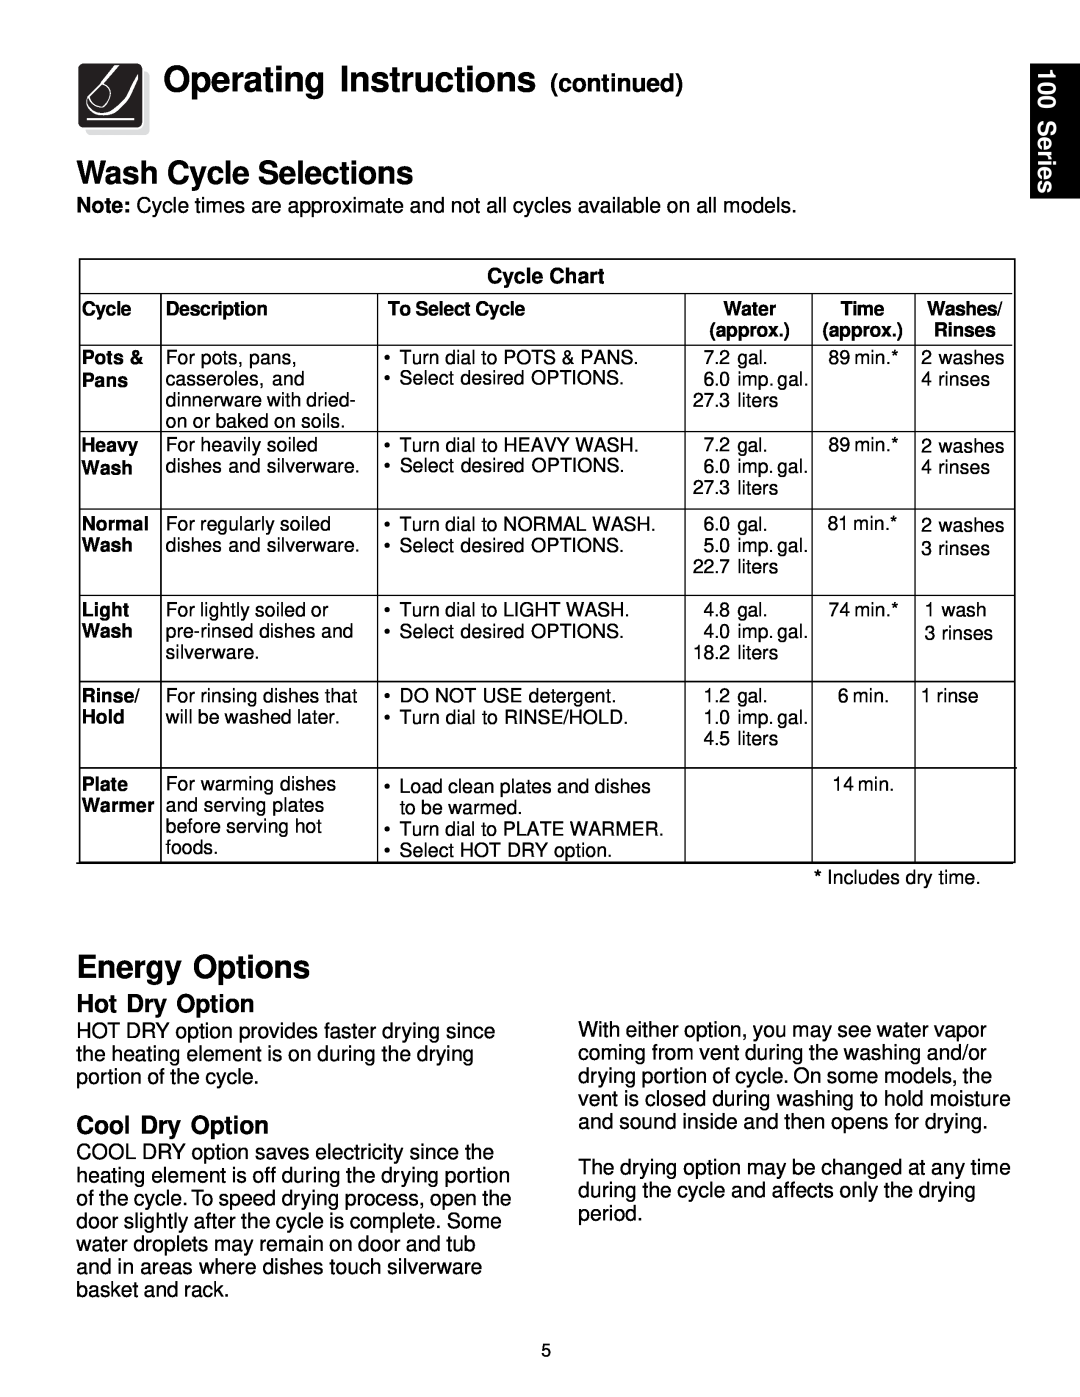 Frigidaire 400 Series warranty Operating Instructions continued, Wash Cycle Selections, Energy Options, Cycle Chart 